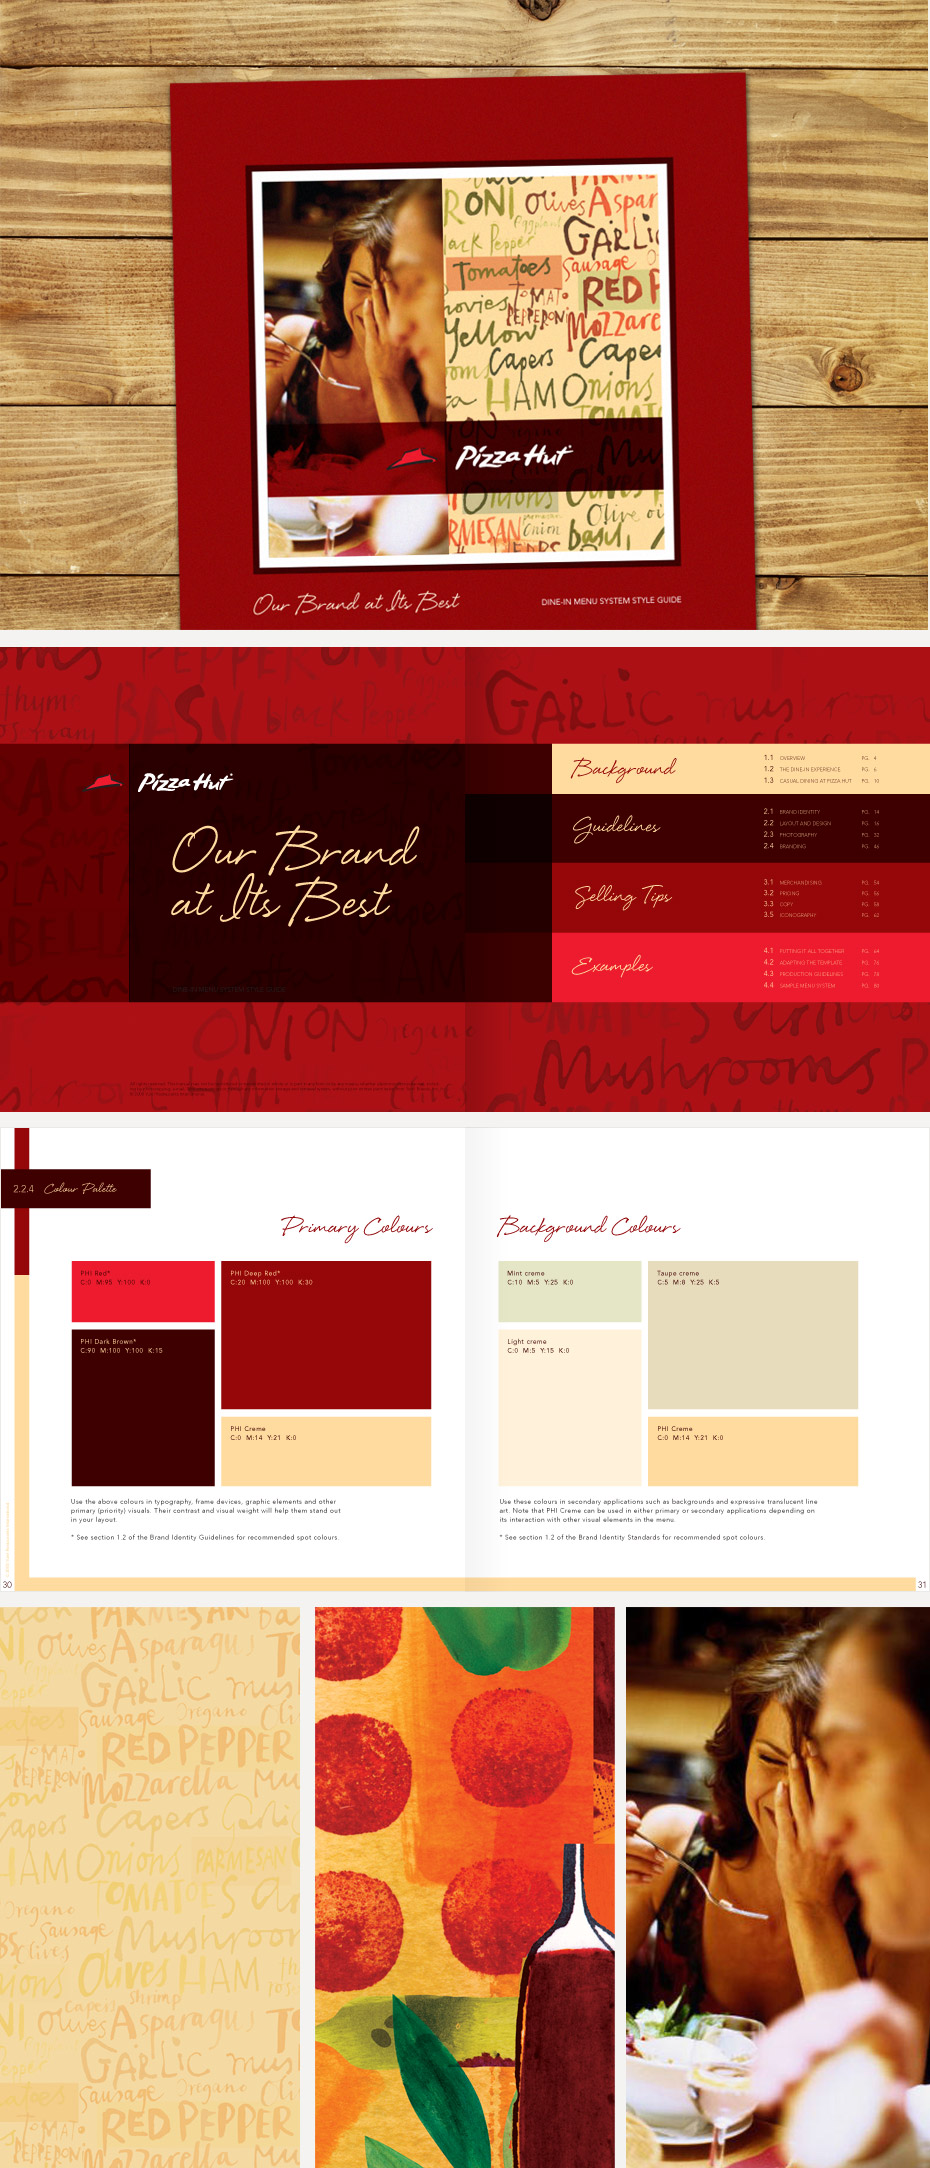 Pizza Hut Menu Style Guide Cover, Color Palette & Imagery